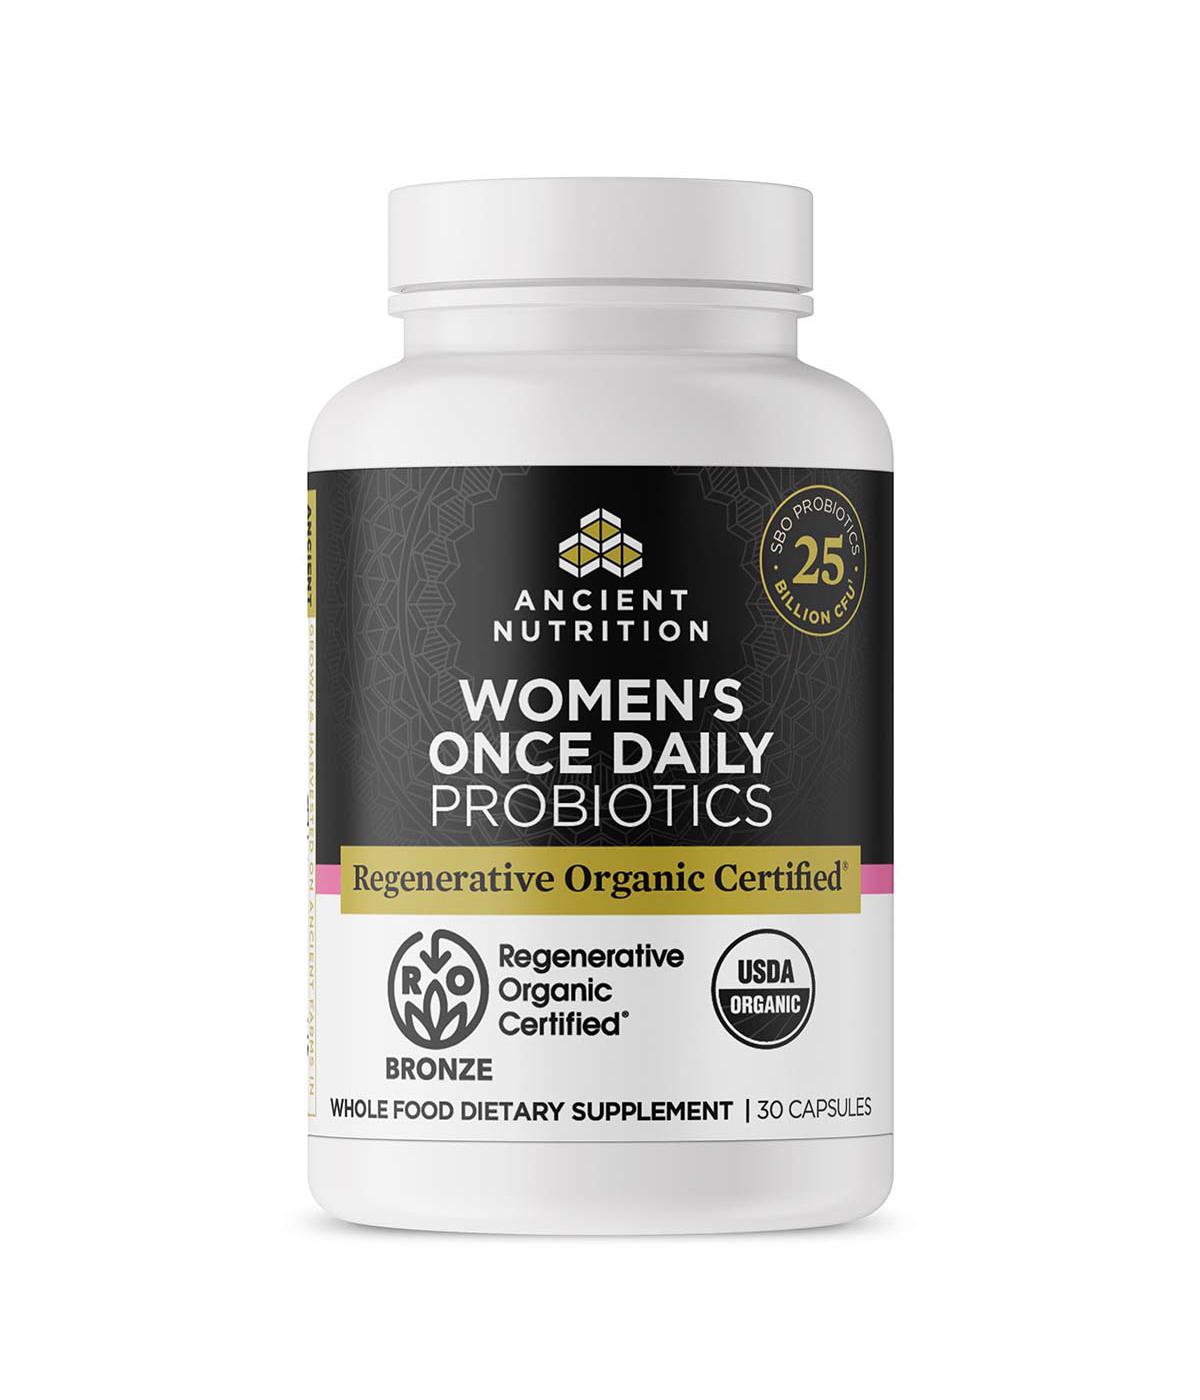 Ancient Nutrition Women's Once Daily Probiotics Capsules; image 3 of 5